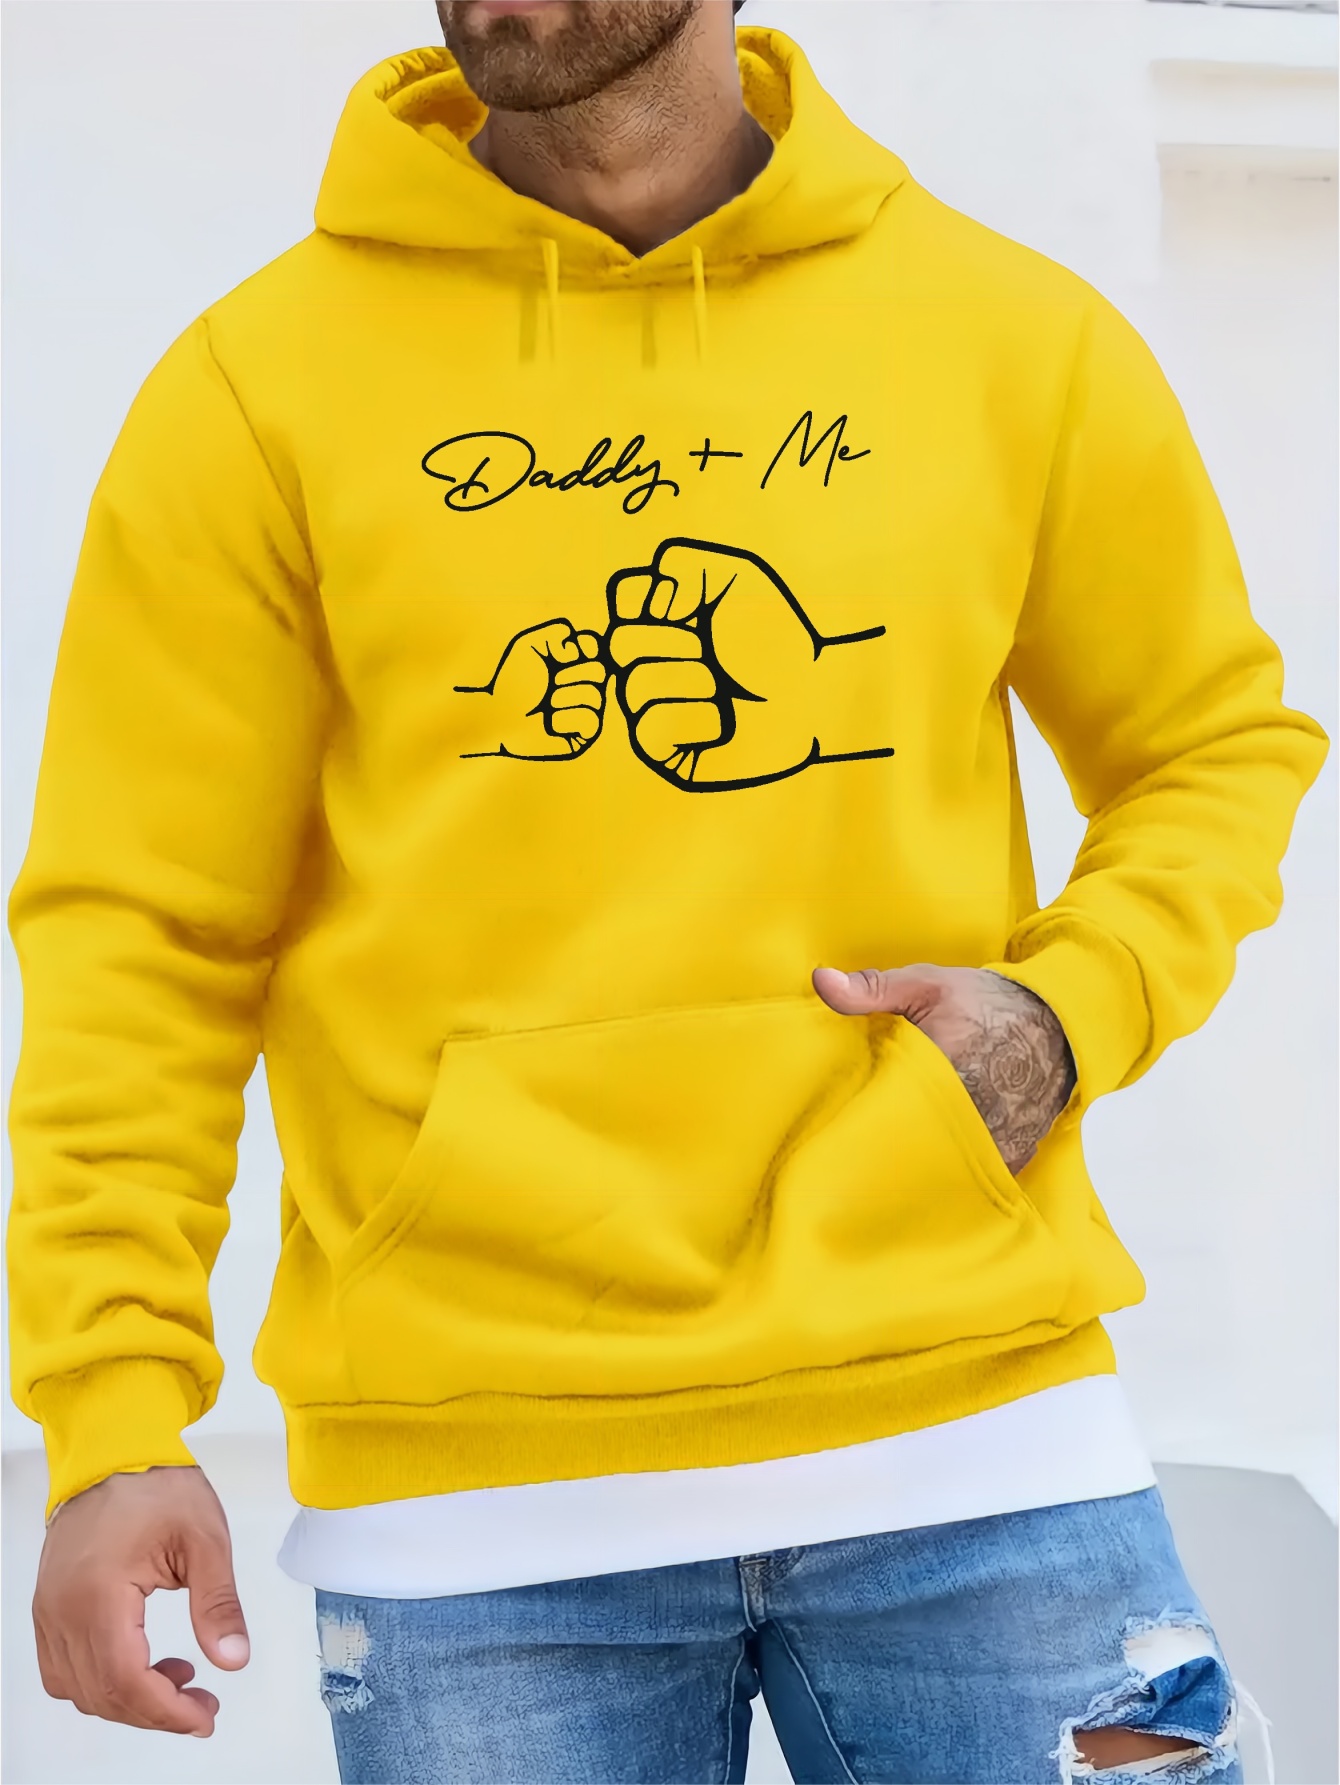 daddy me print kangaroo pocket fleece sweatshirt hoodie pullover fashion street style long sleeve sports tops graphic pullover shirts for men autumn winter gifts details 13